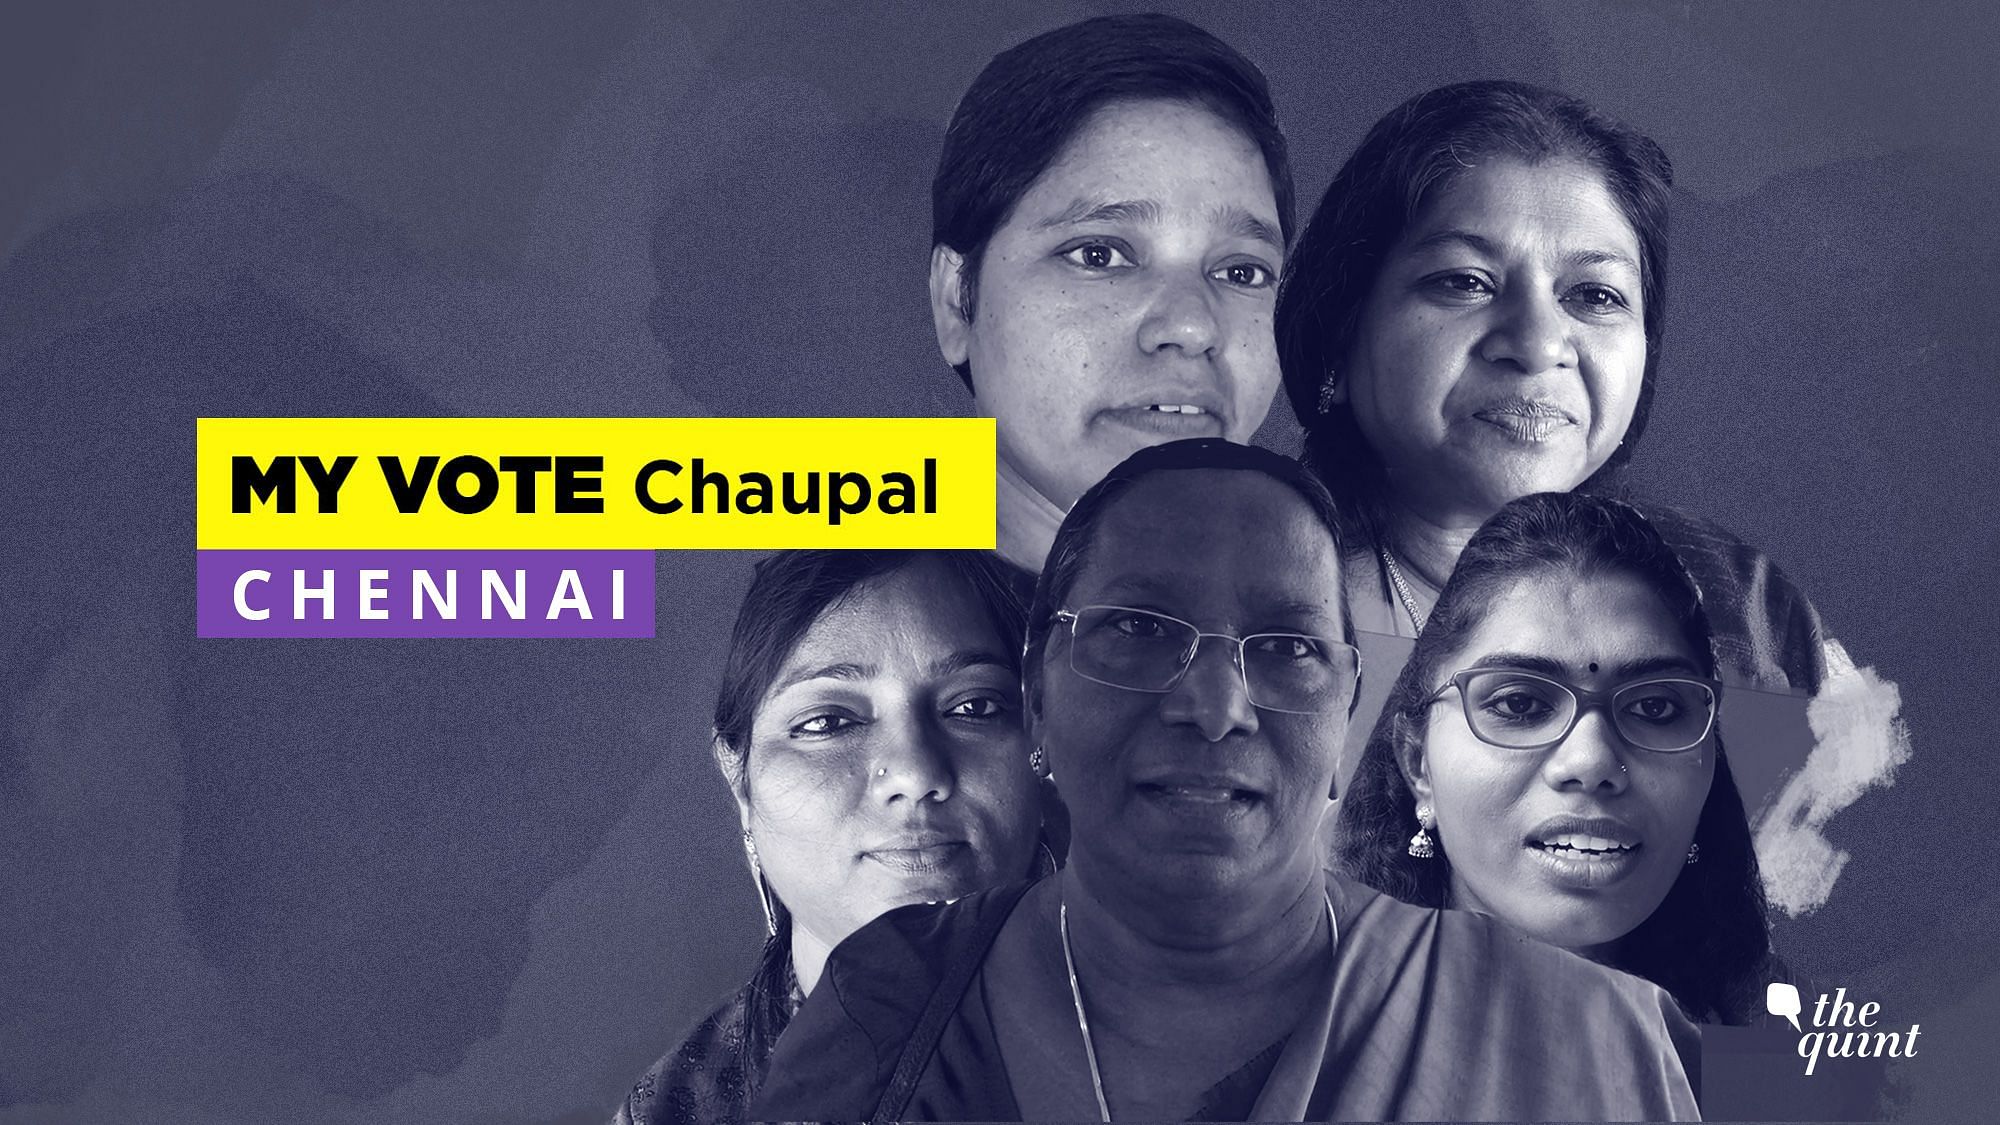 The Quint, in its Chaupal series, spoke to a few of the prominent Dalit activists and leaders to understand their expectations from the 2019 elections. 